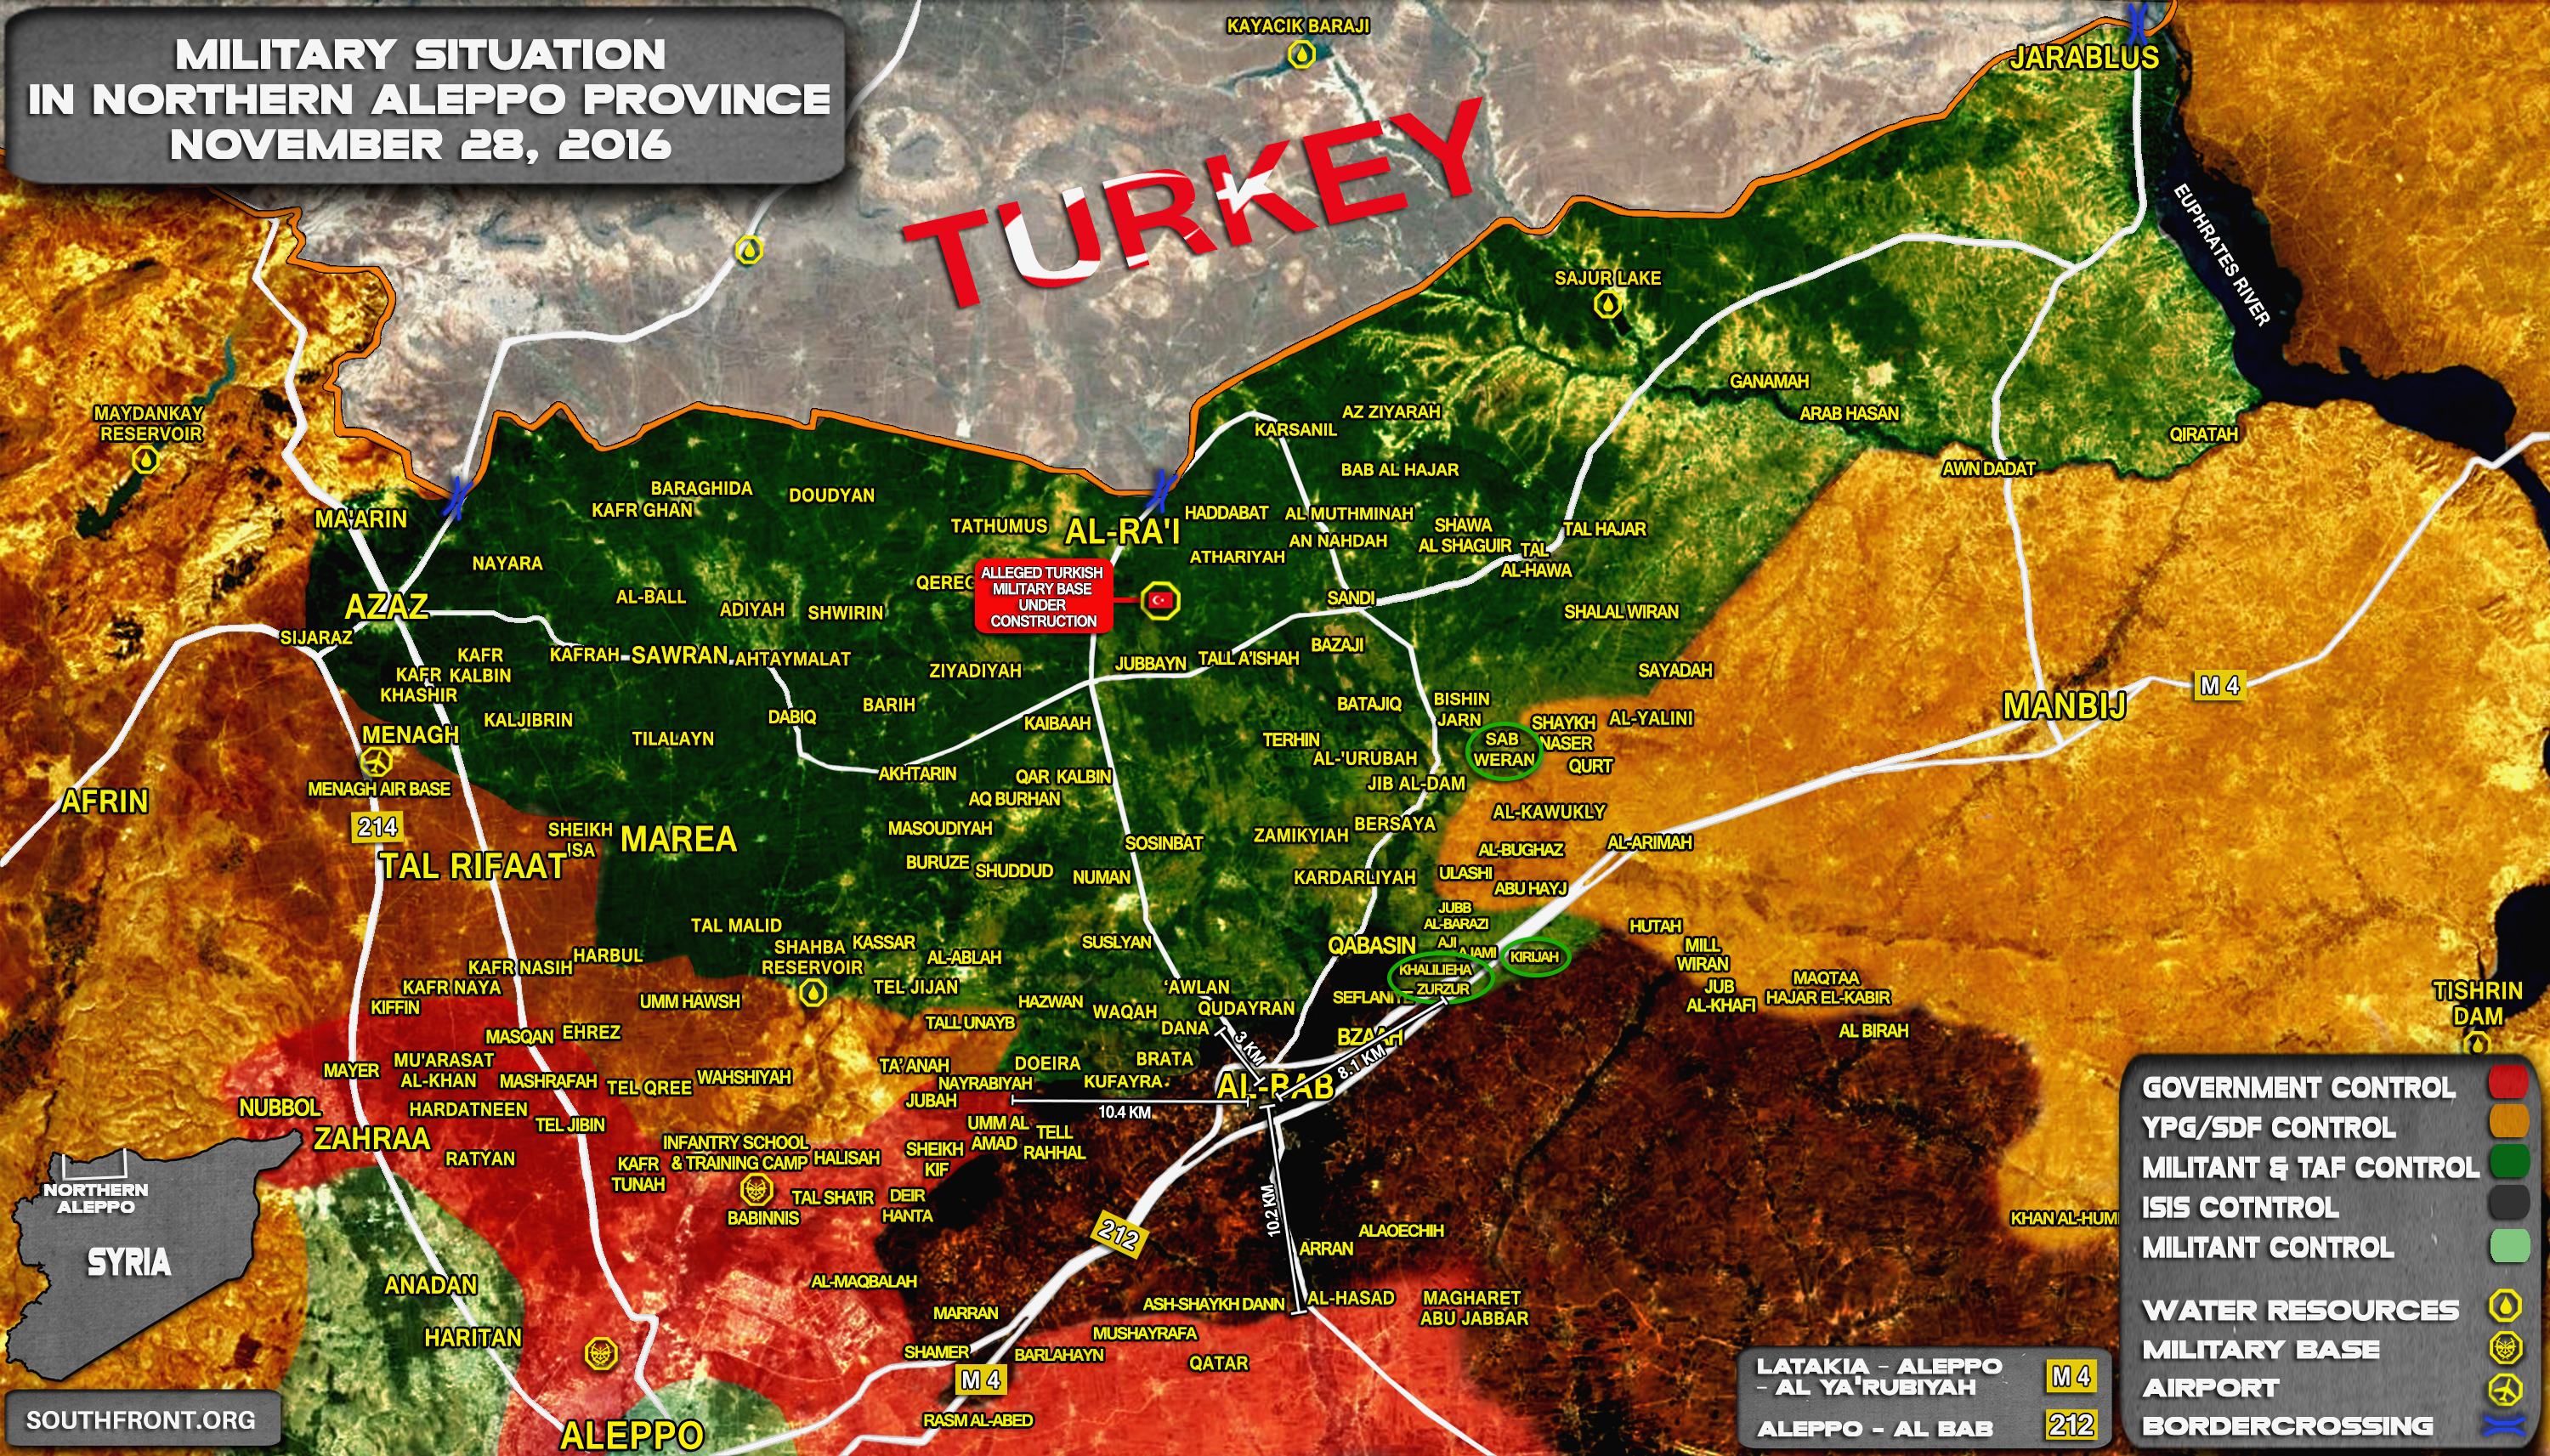 Syria Map Update: Military Situation in Northern Part of Aleppo Province on November 28, 2016